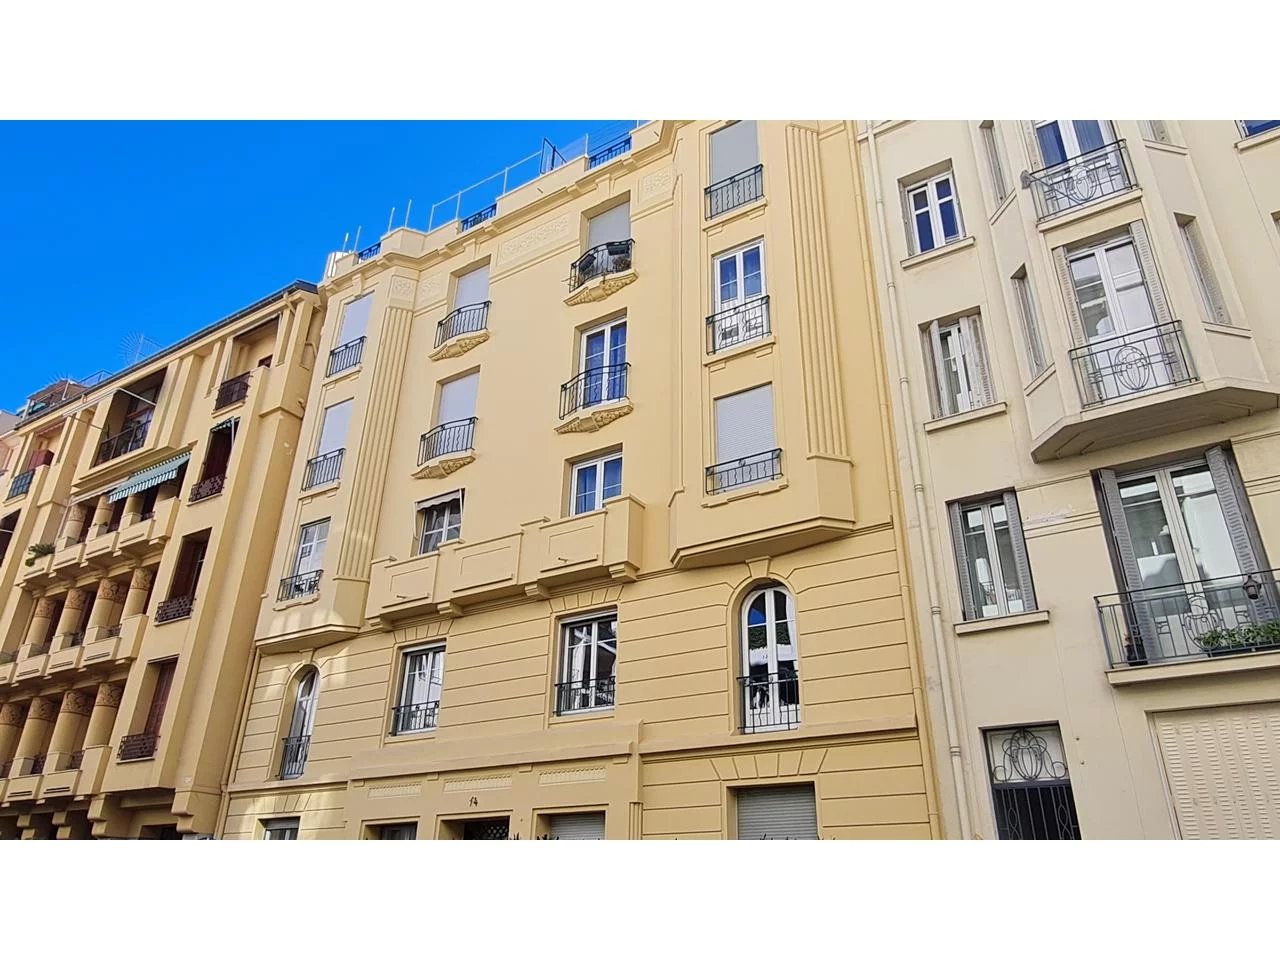 Appartement  3 Rooms 67m2  for sale   675 000 €